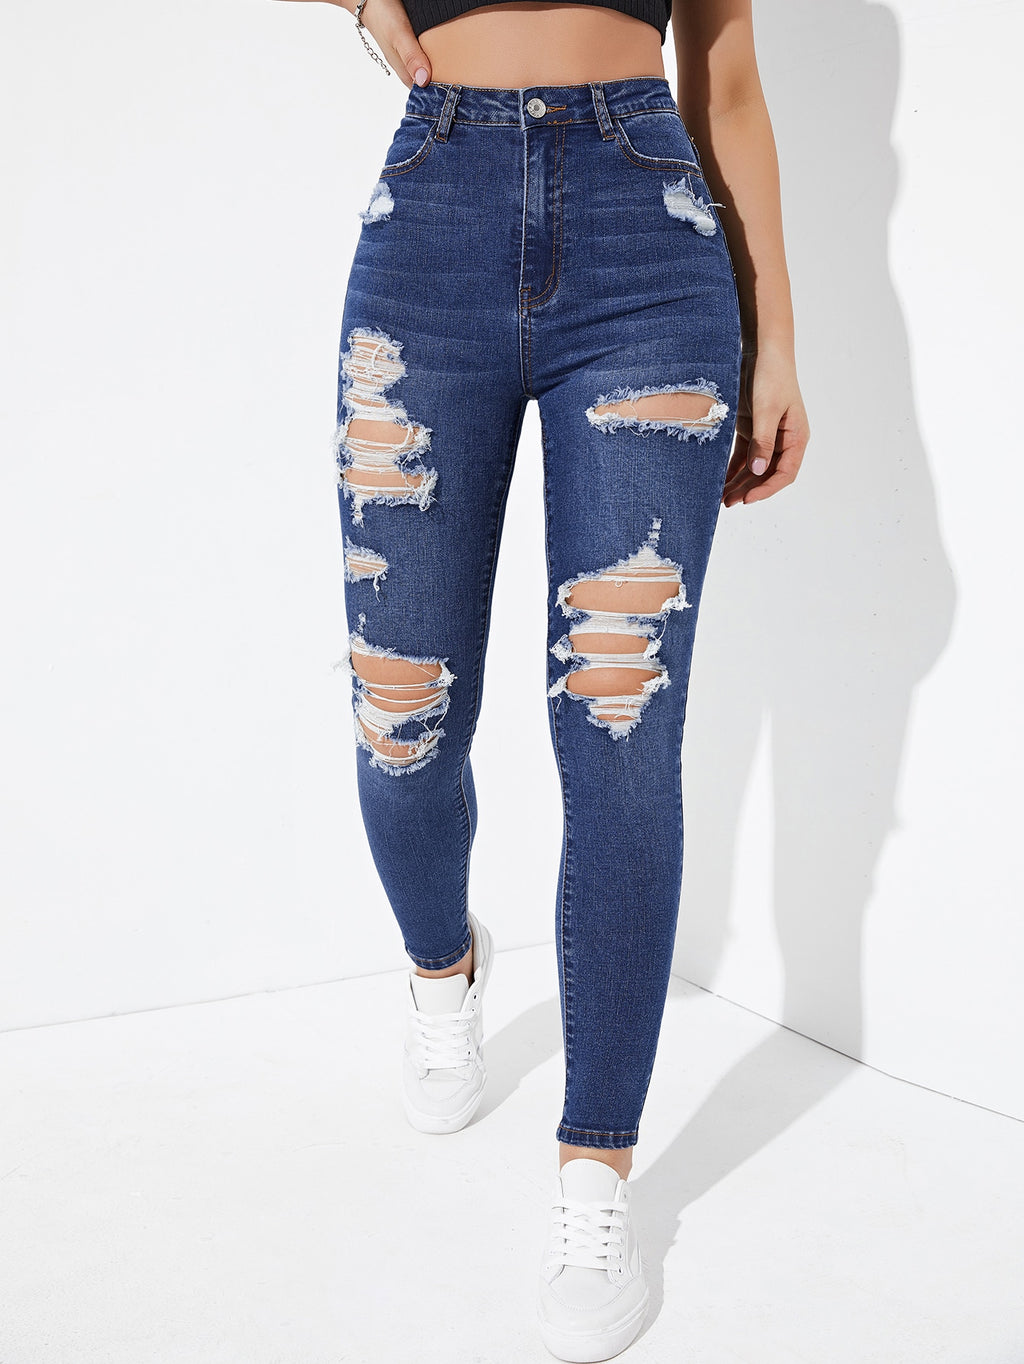 Ripped Skinny Jeans with High Waist | Pomona and Peach